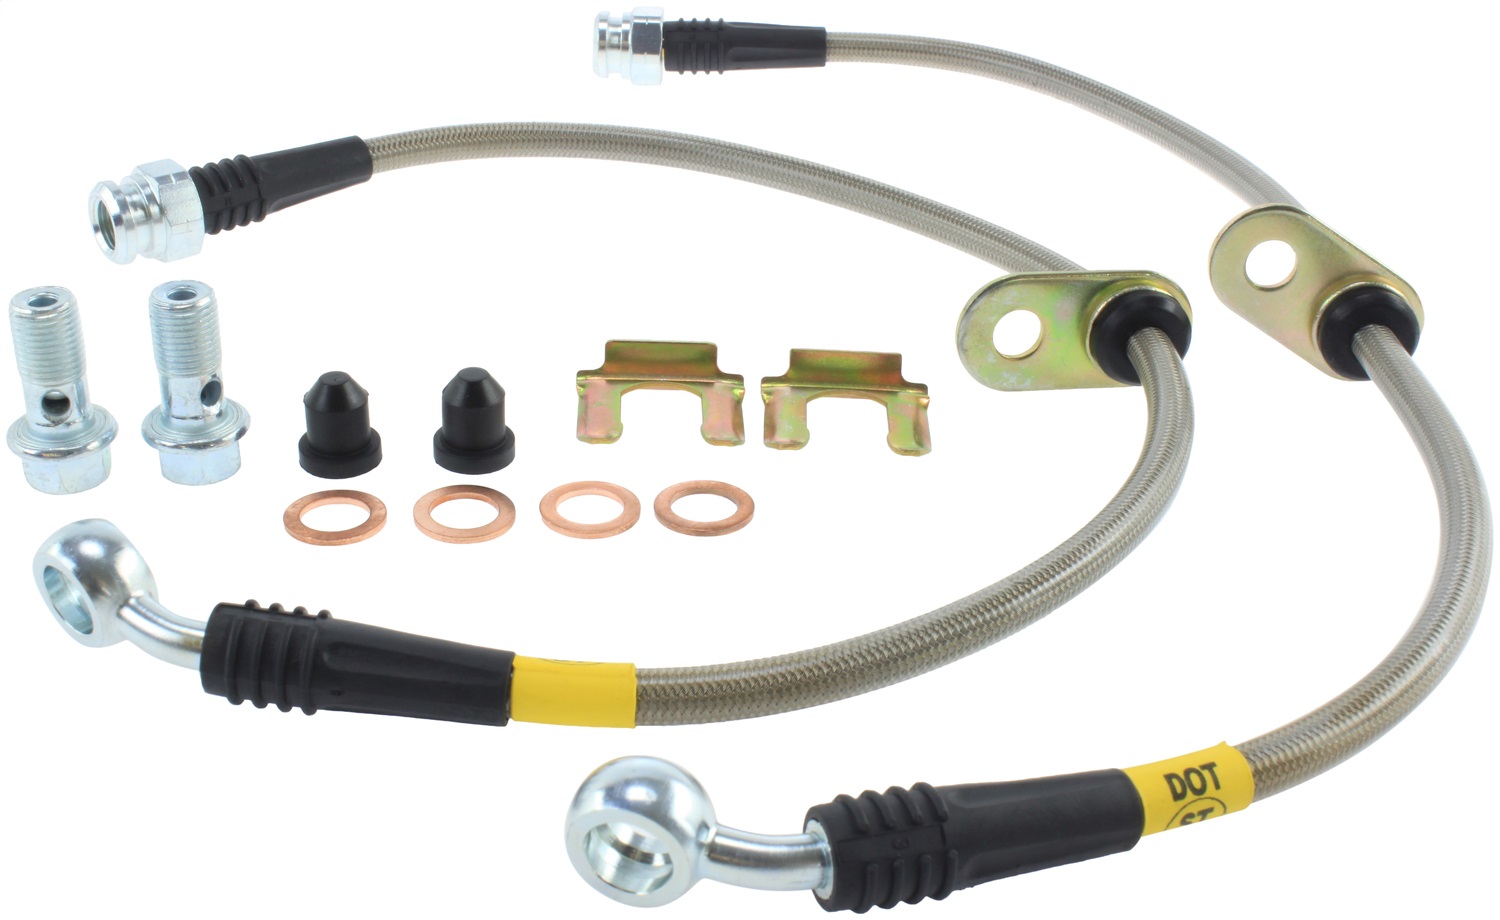 StopTech 950.40519 Stainless Steel Braided Brake Hose Kit Fits 12-15 Civic ILX